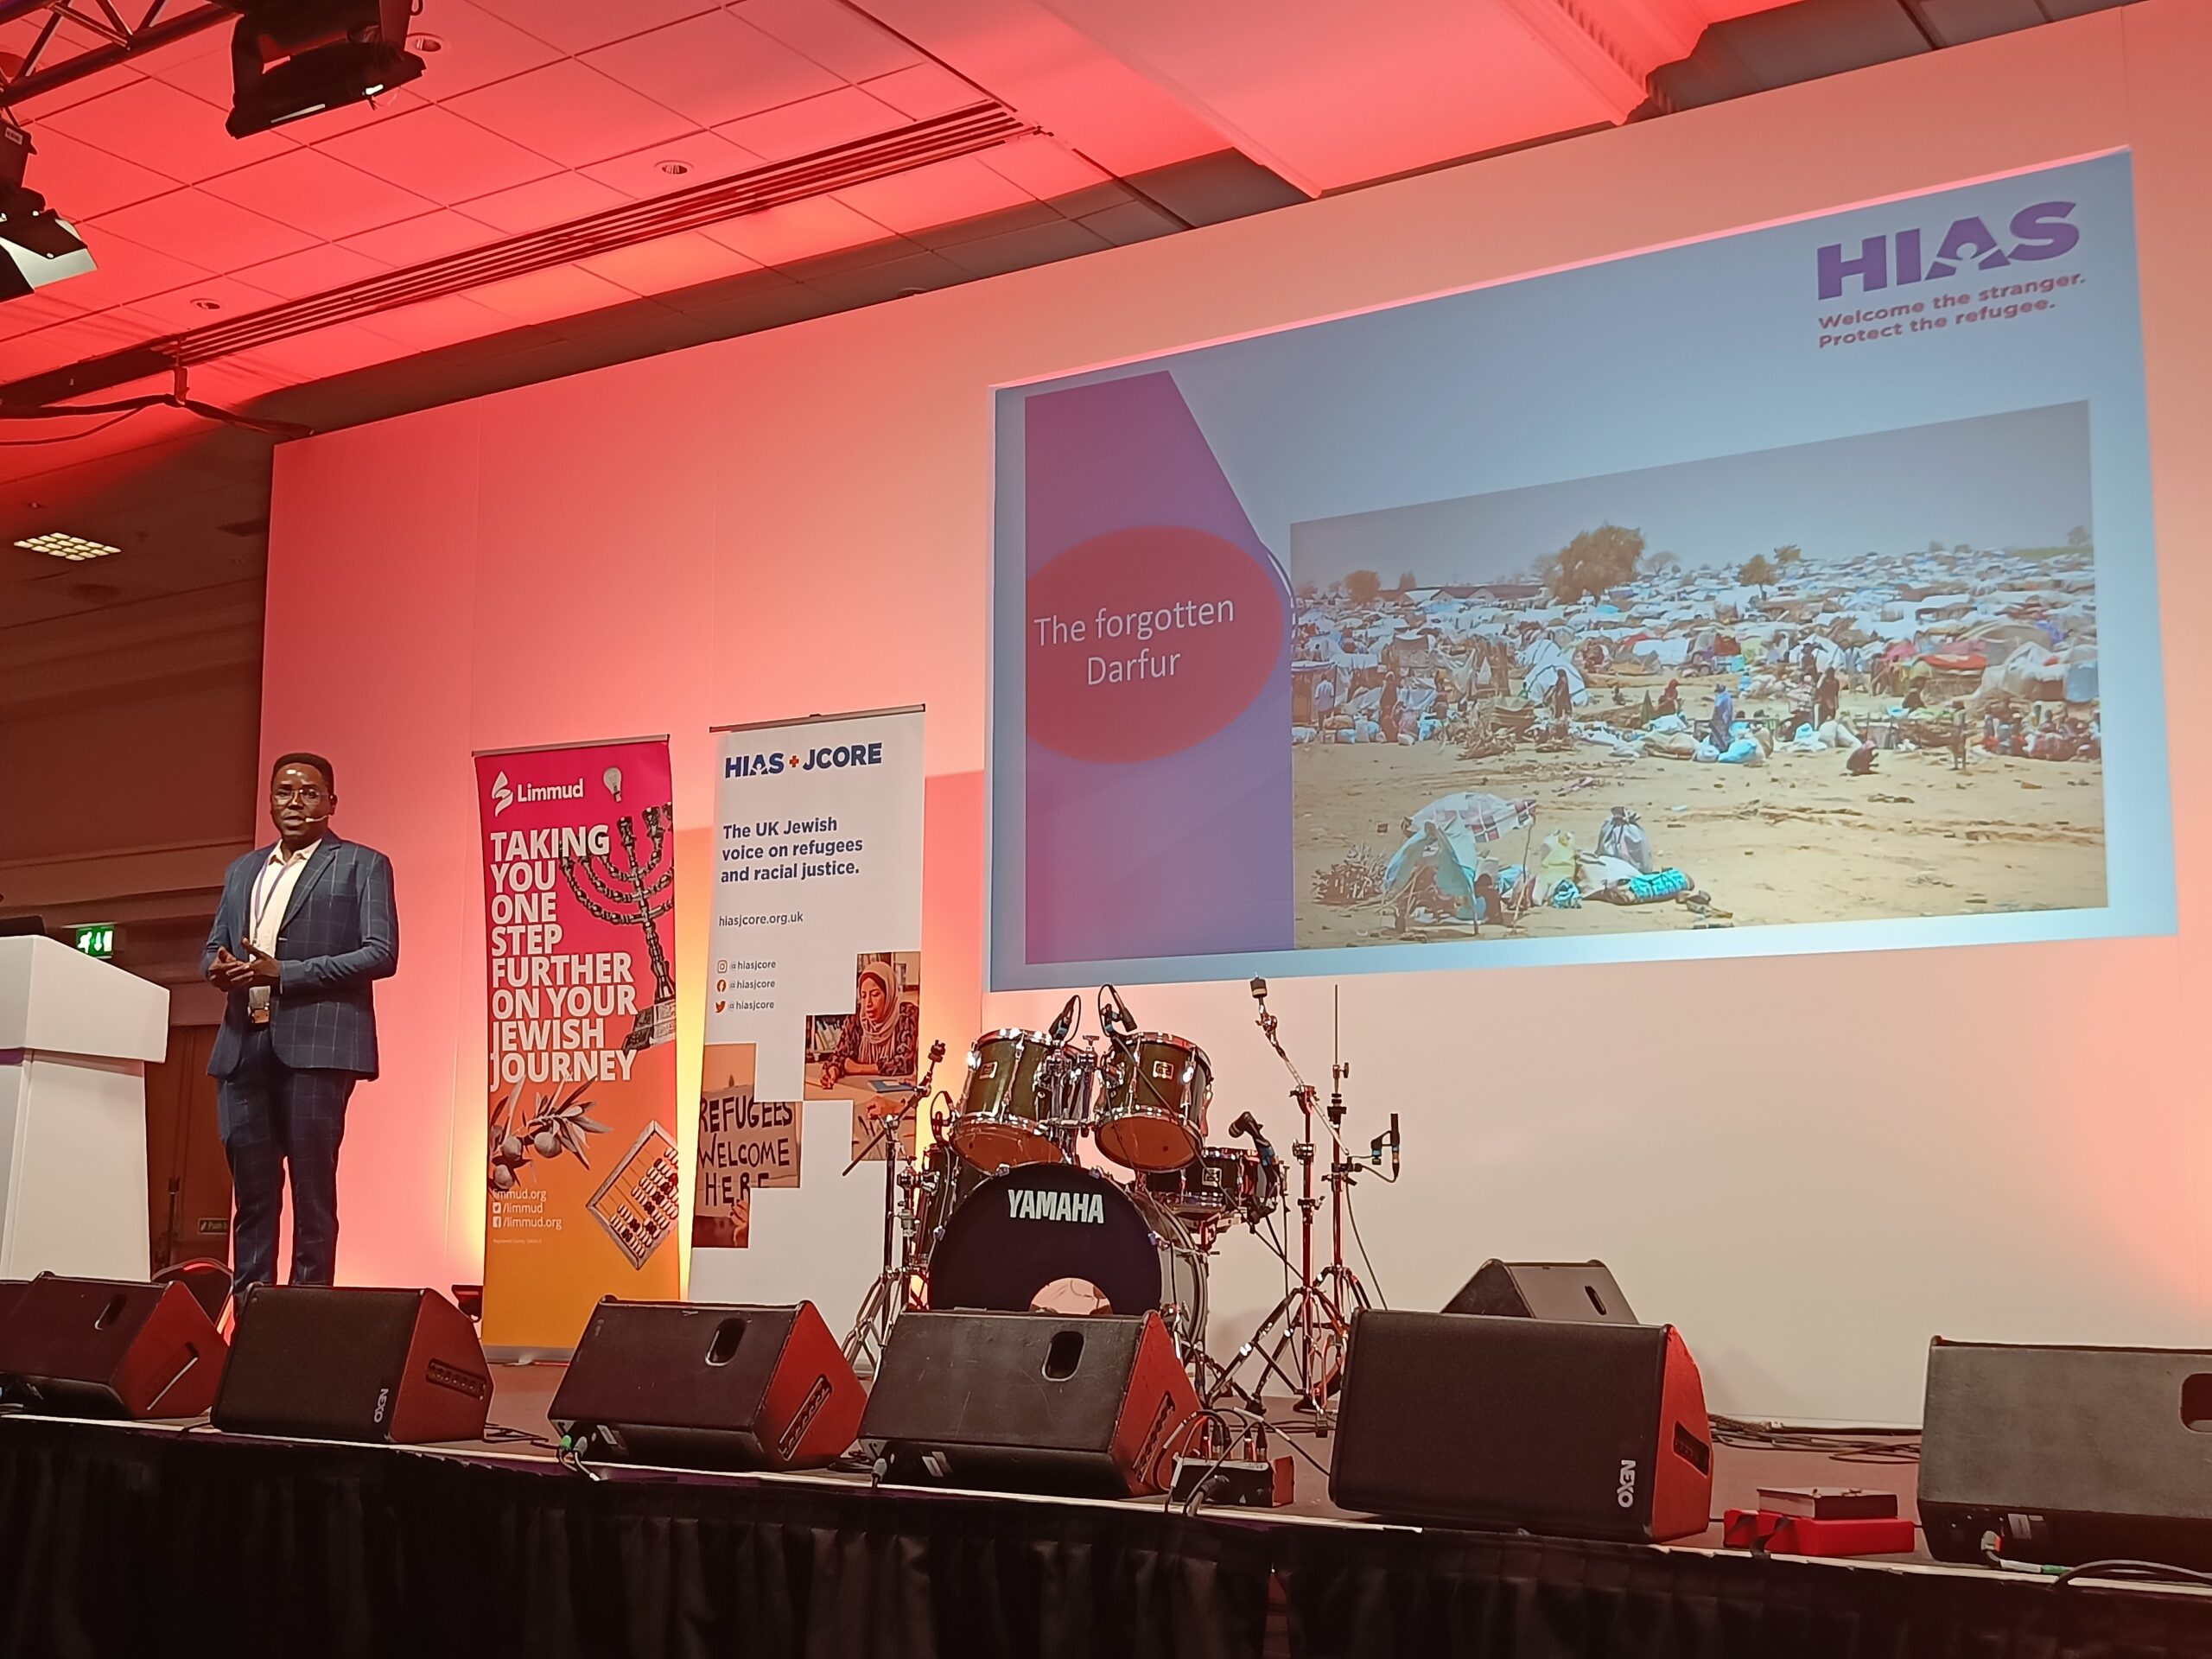 Monim Haroon presents on stage at Limmud. He is wearing a suit, and behind him are Limmud and HIAS+JCORE banner stands. Projected behind him is a screen showing a slide, with an image of a refugee camp and text reading: 